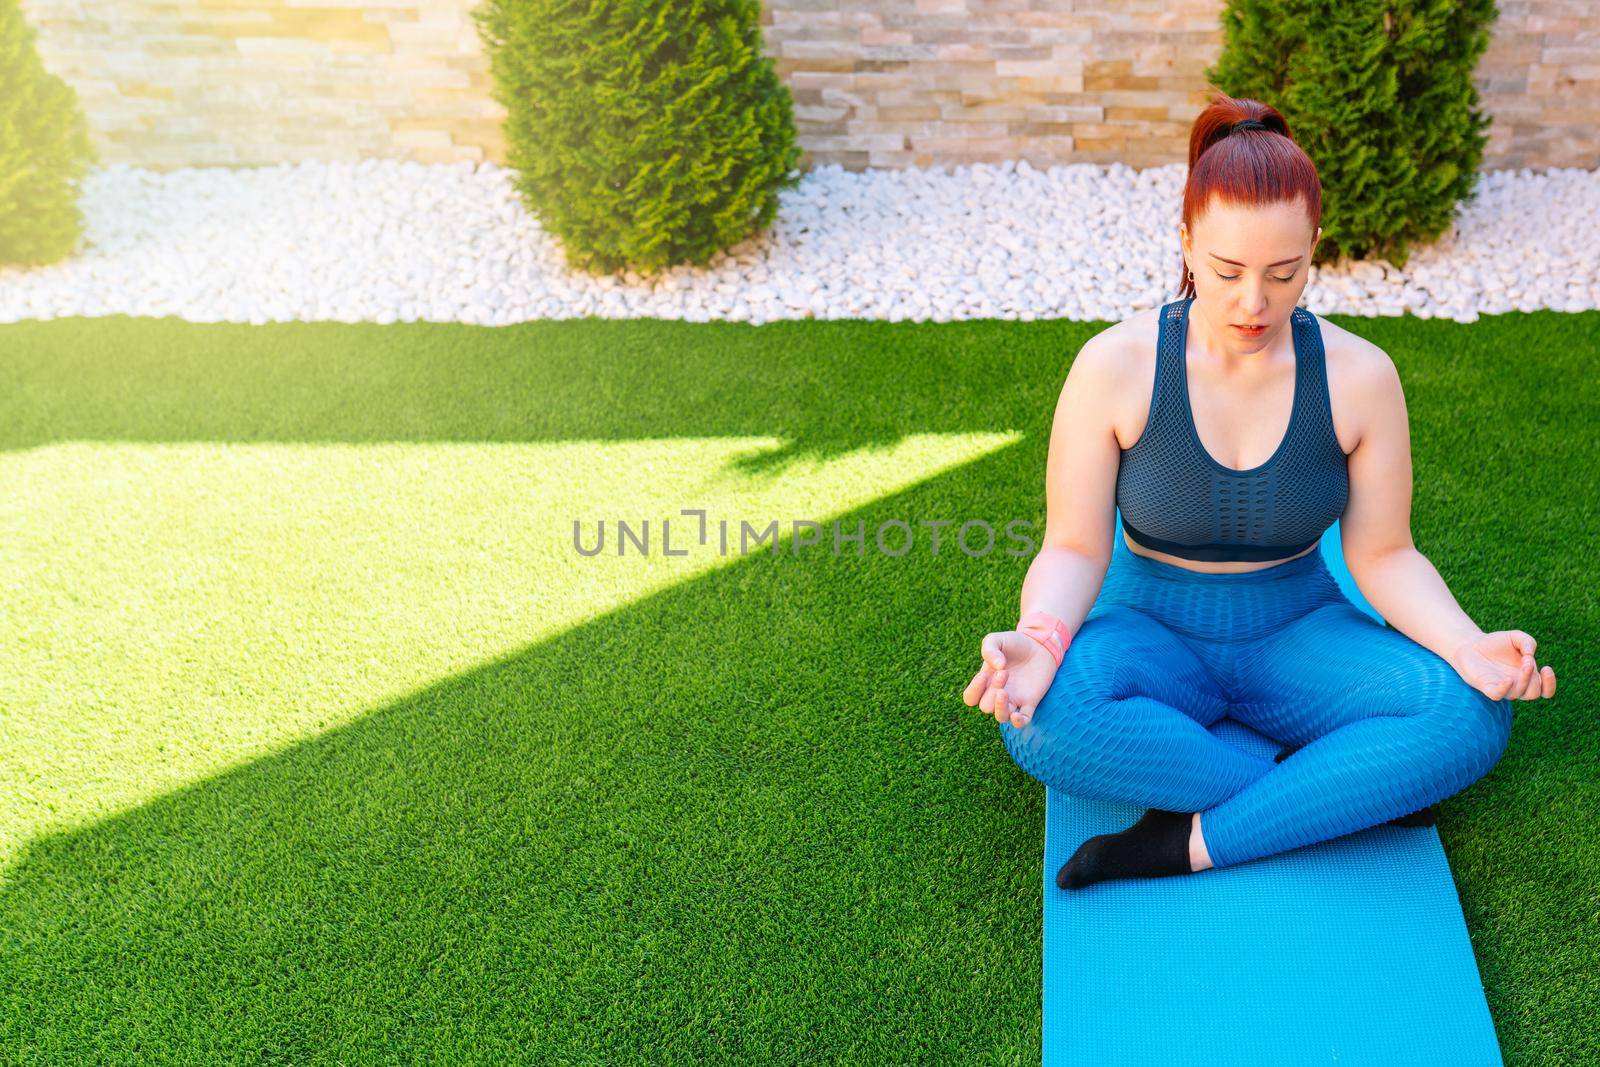 woman practicing meditation in the open air, relaxation exercises, doing the lotus posture. copy space. concept of health and well-being. natural outdoor light.